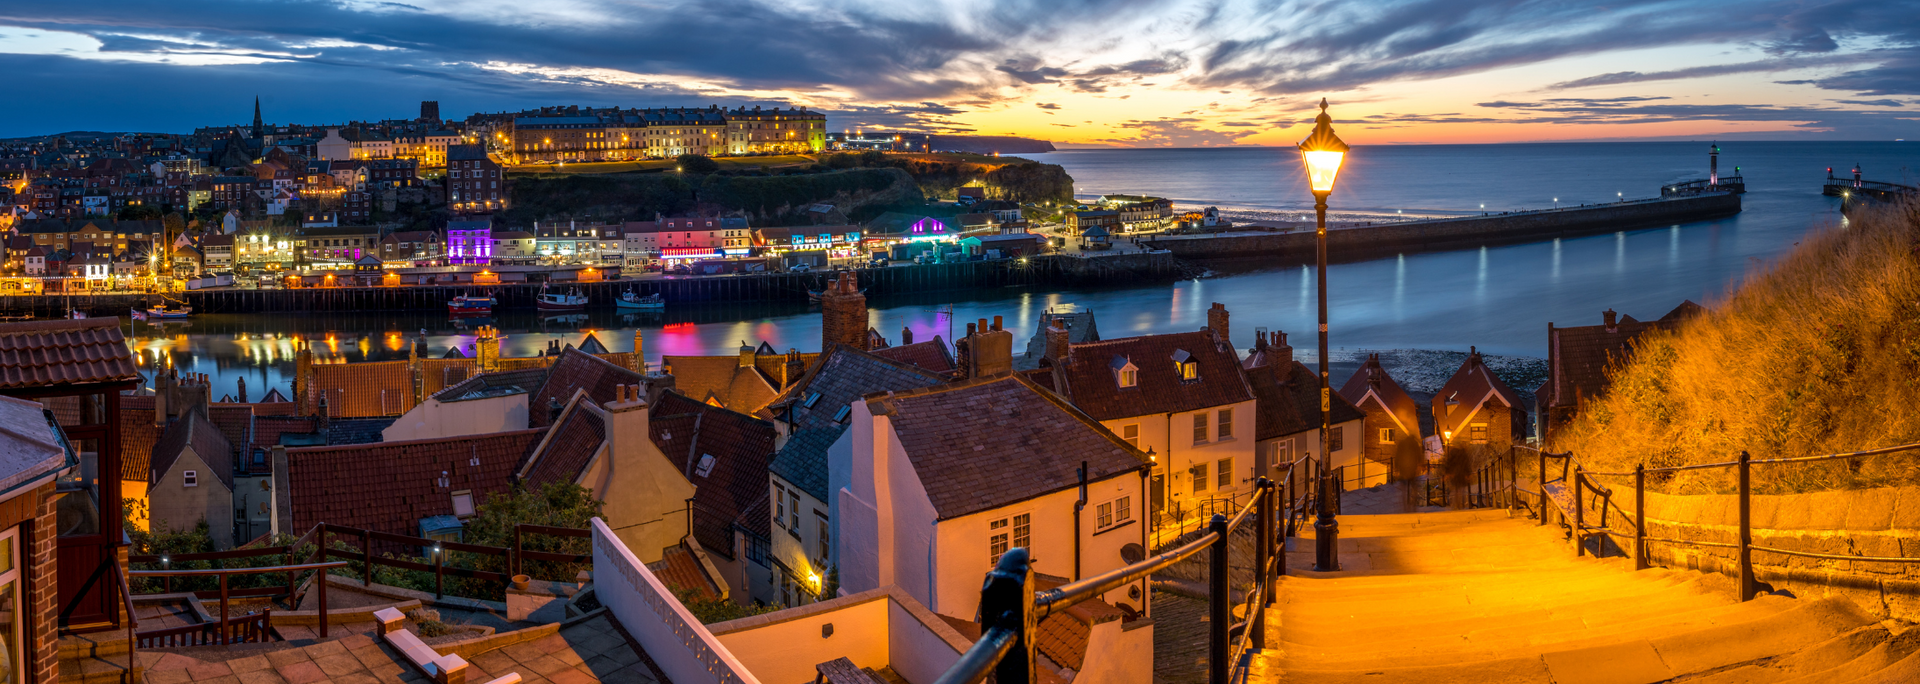 Picture of Whitby, Yorkshire.